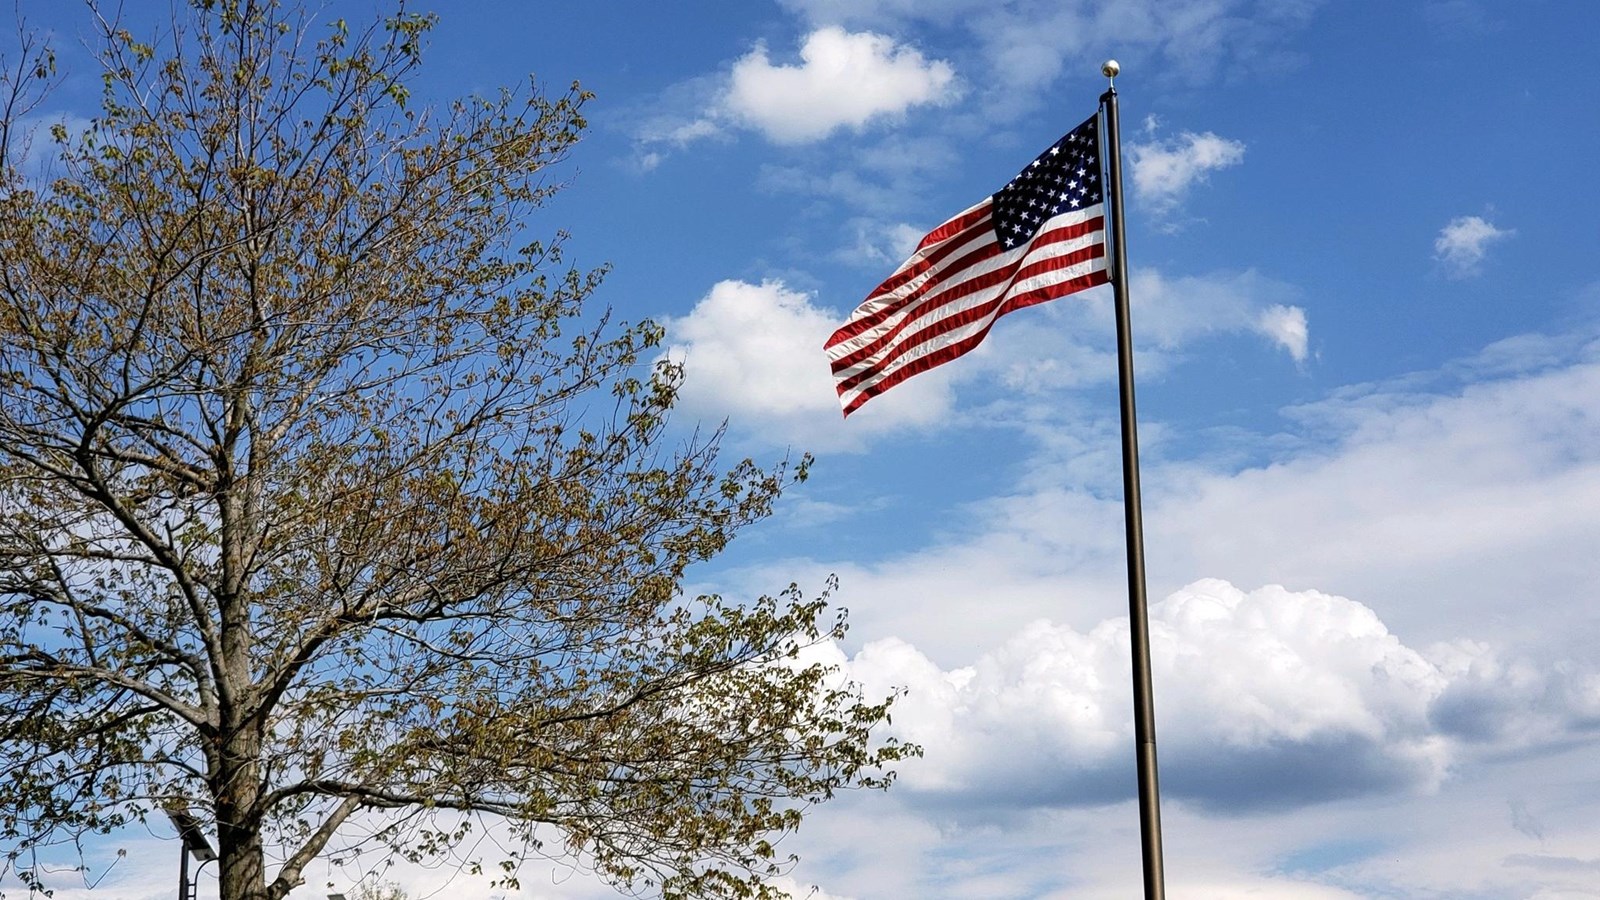 The American flag with red and white stripes and white stars against a blue sky.